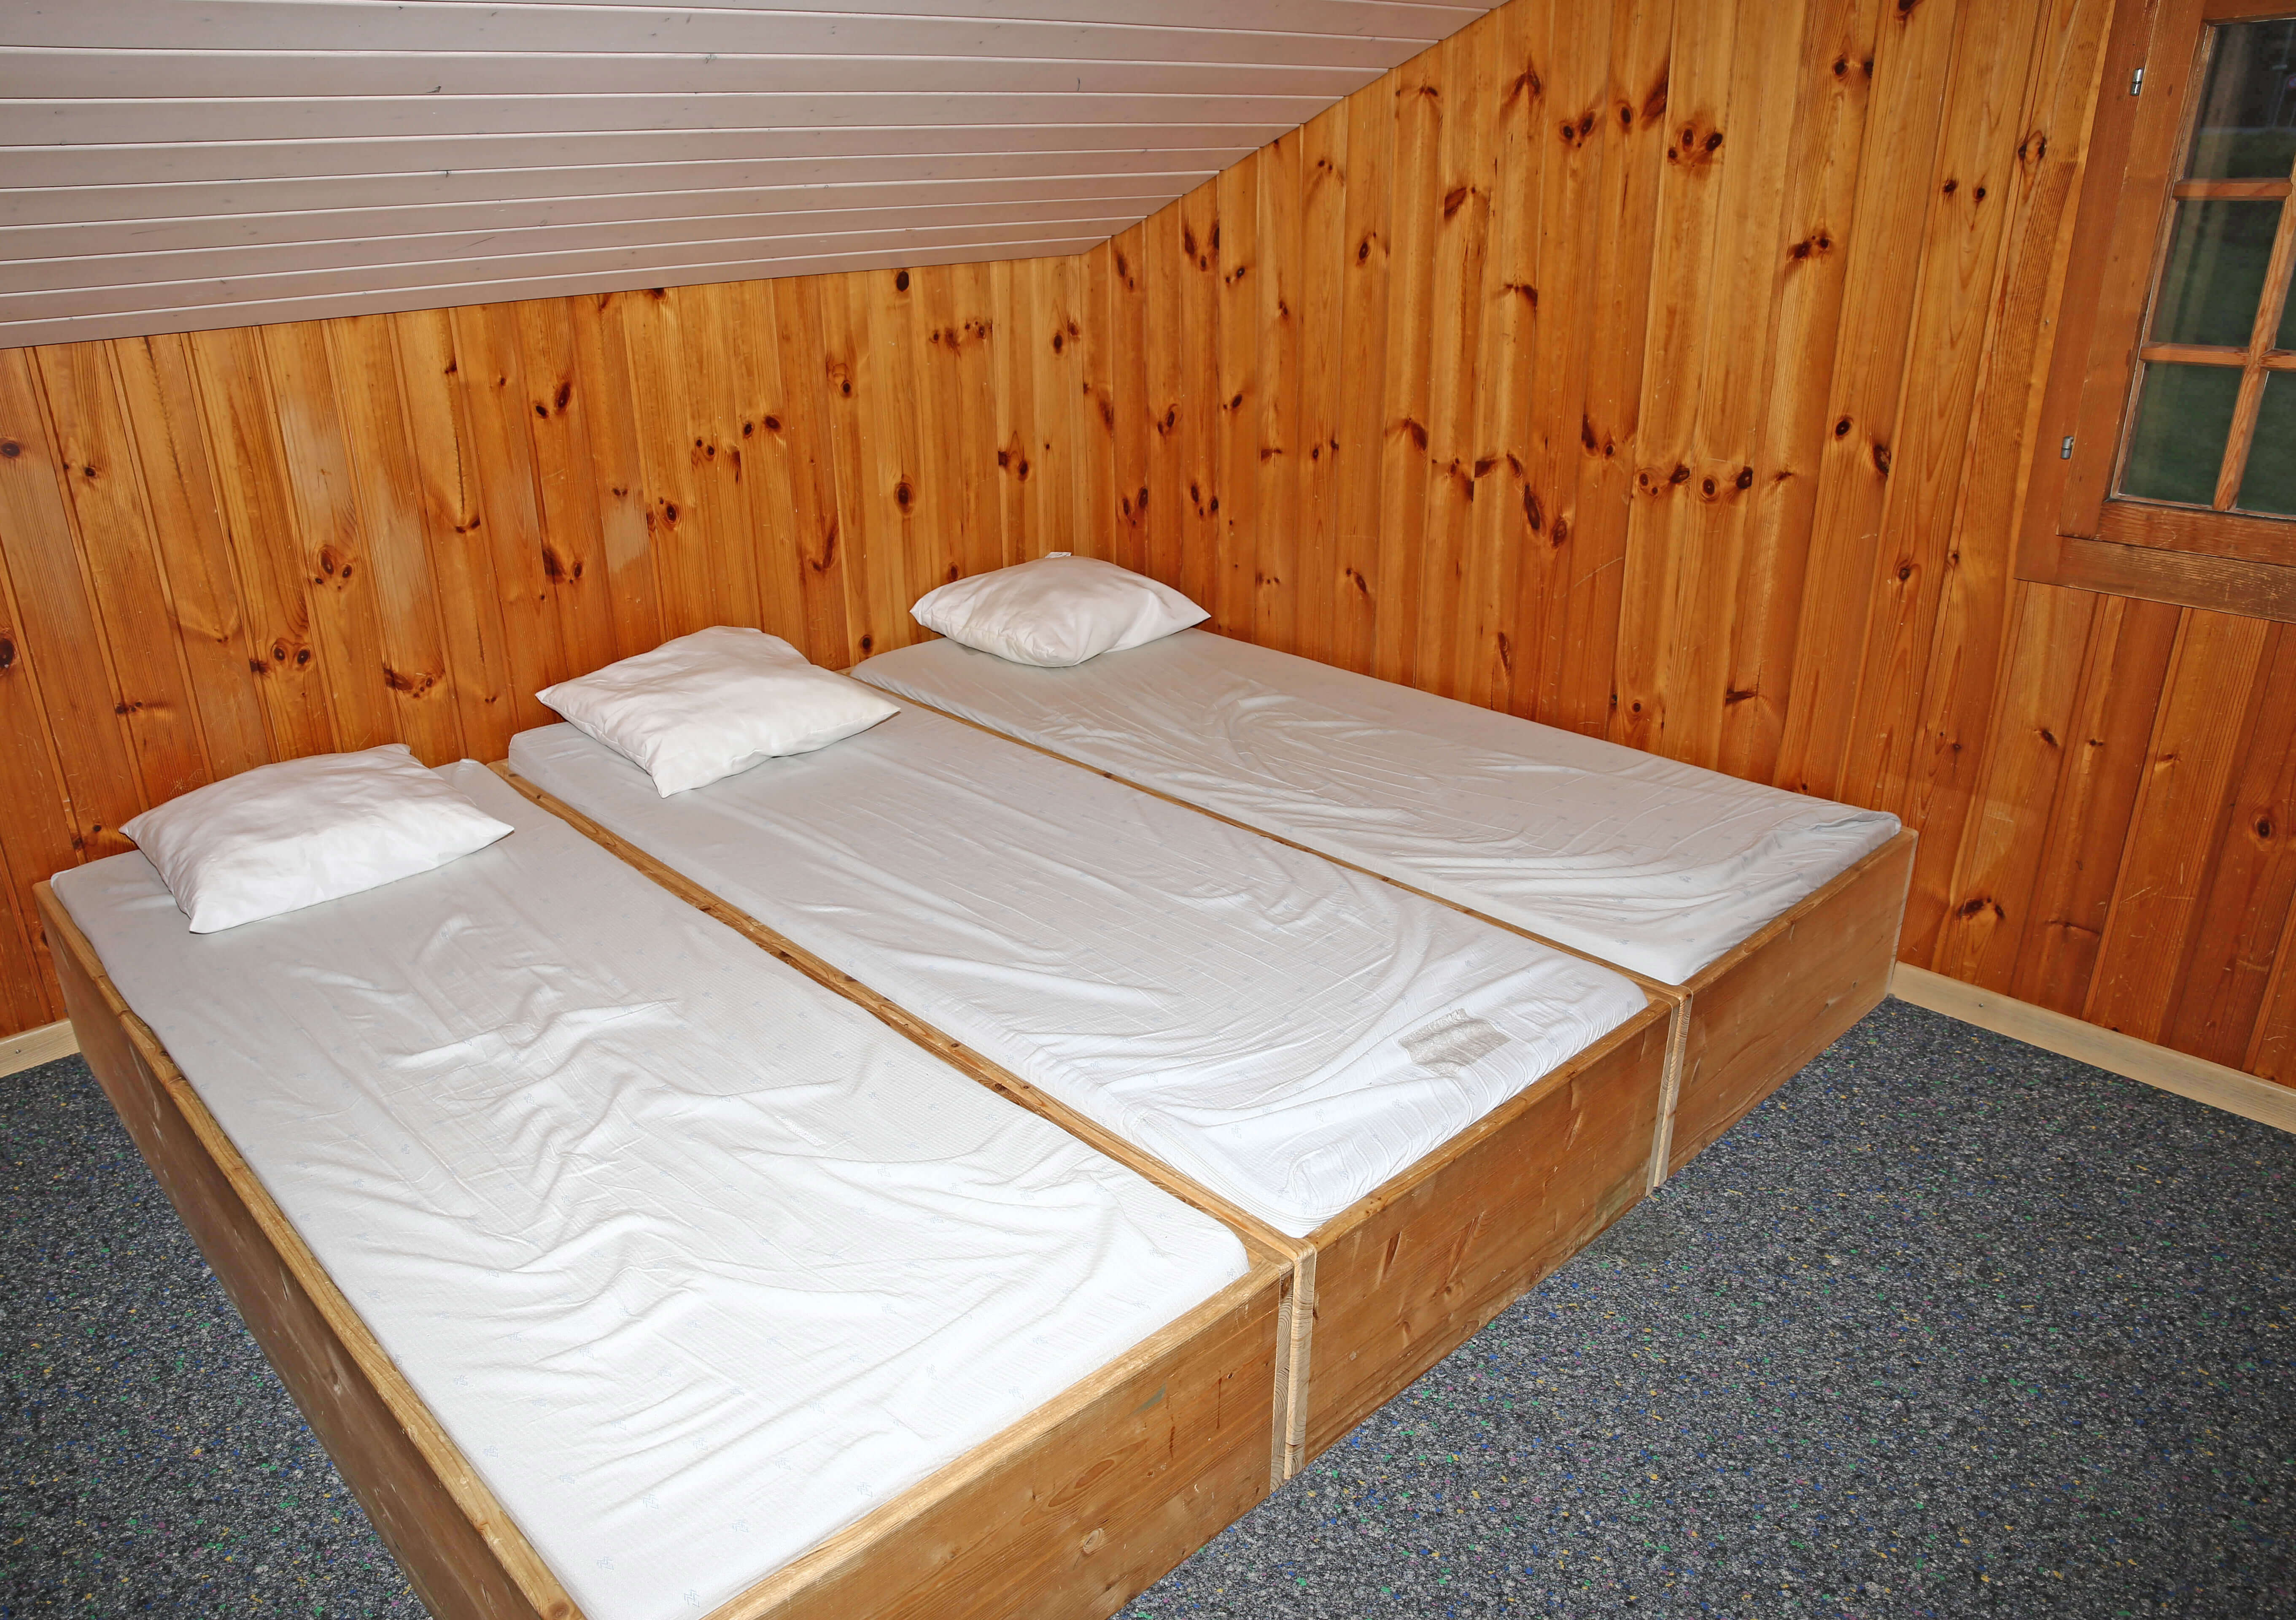 Room with dormitory